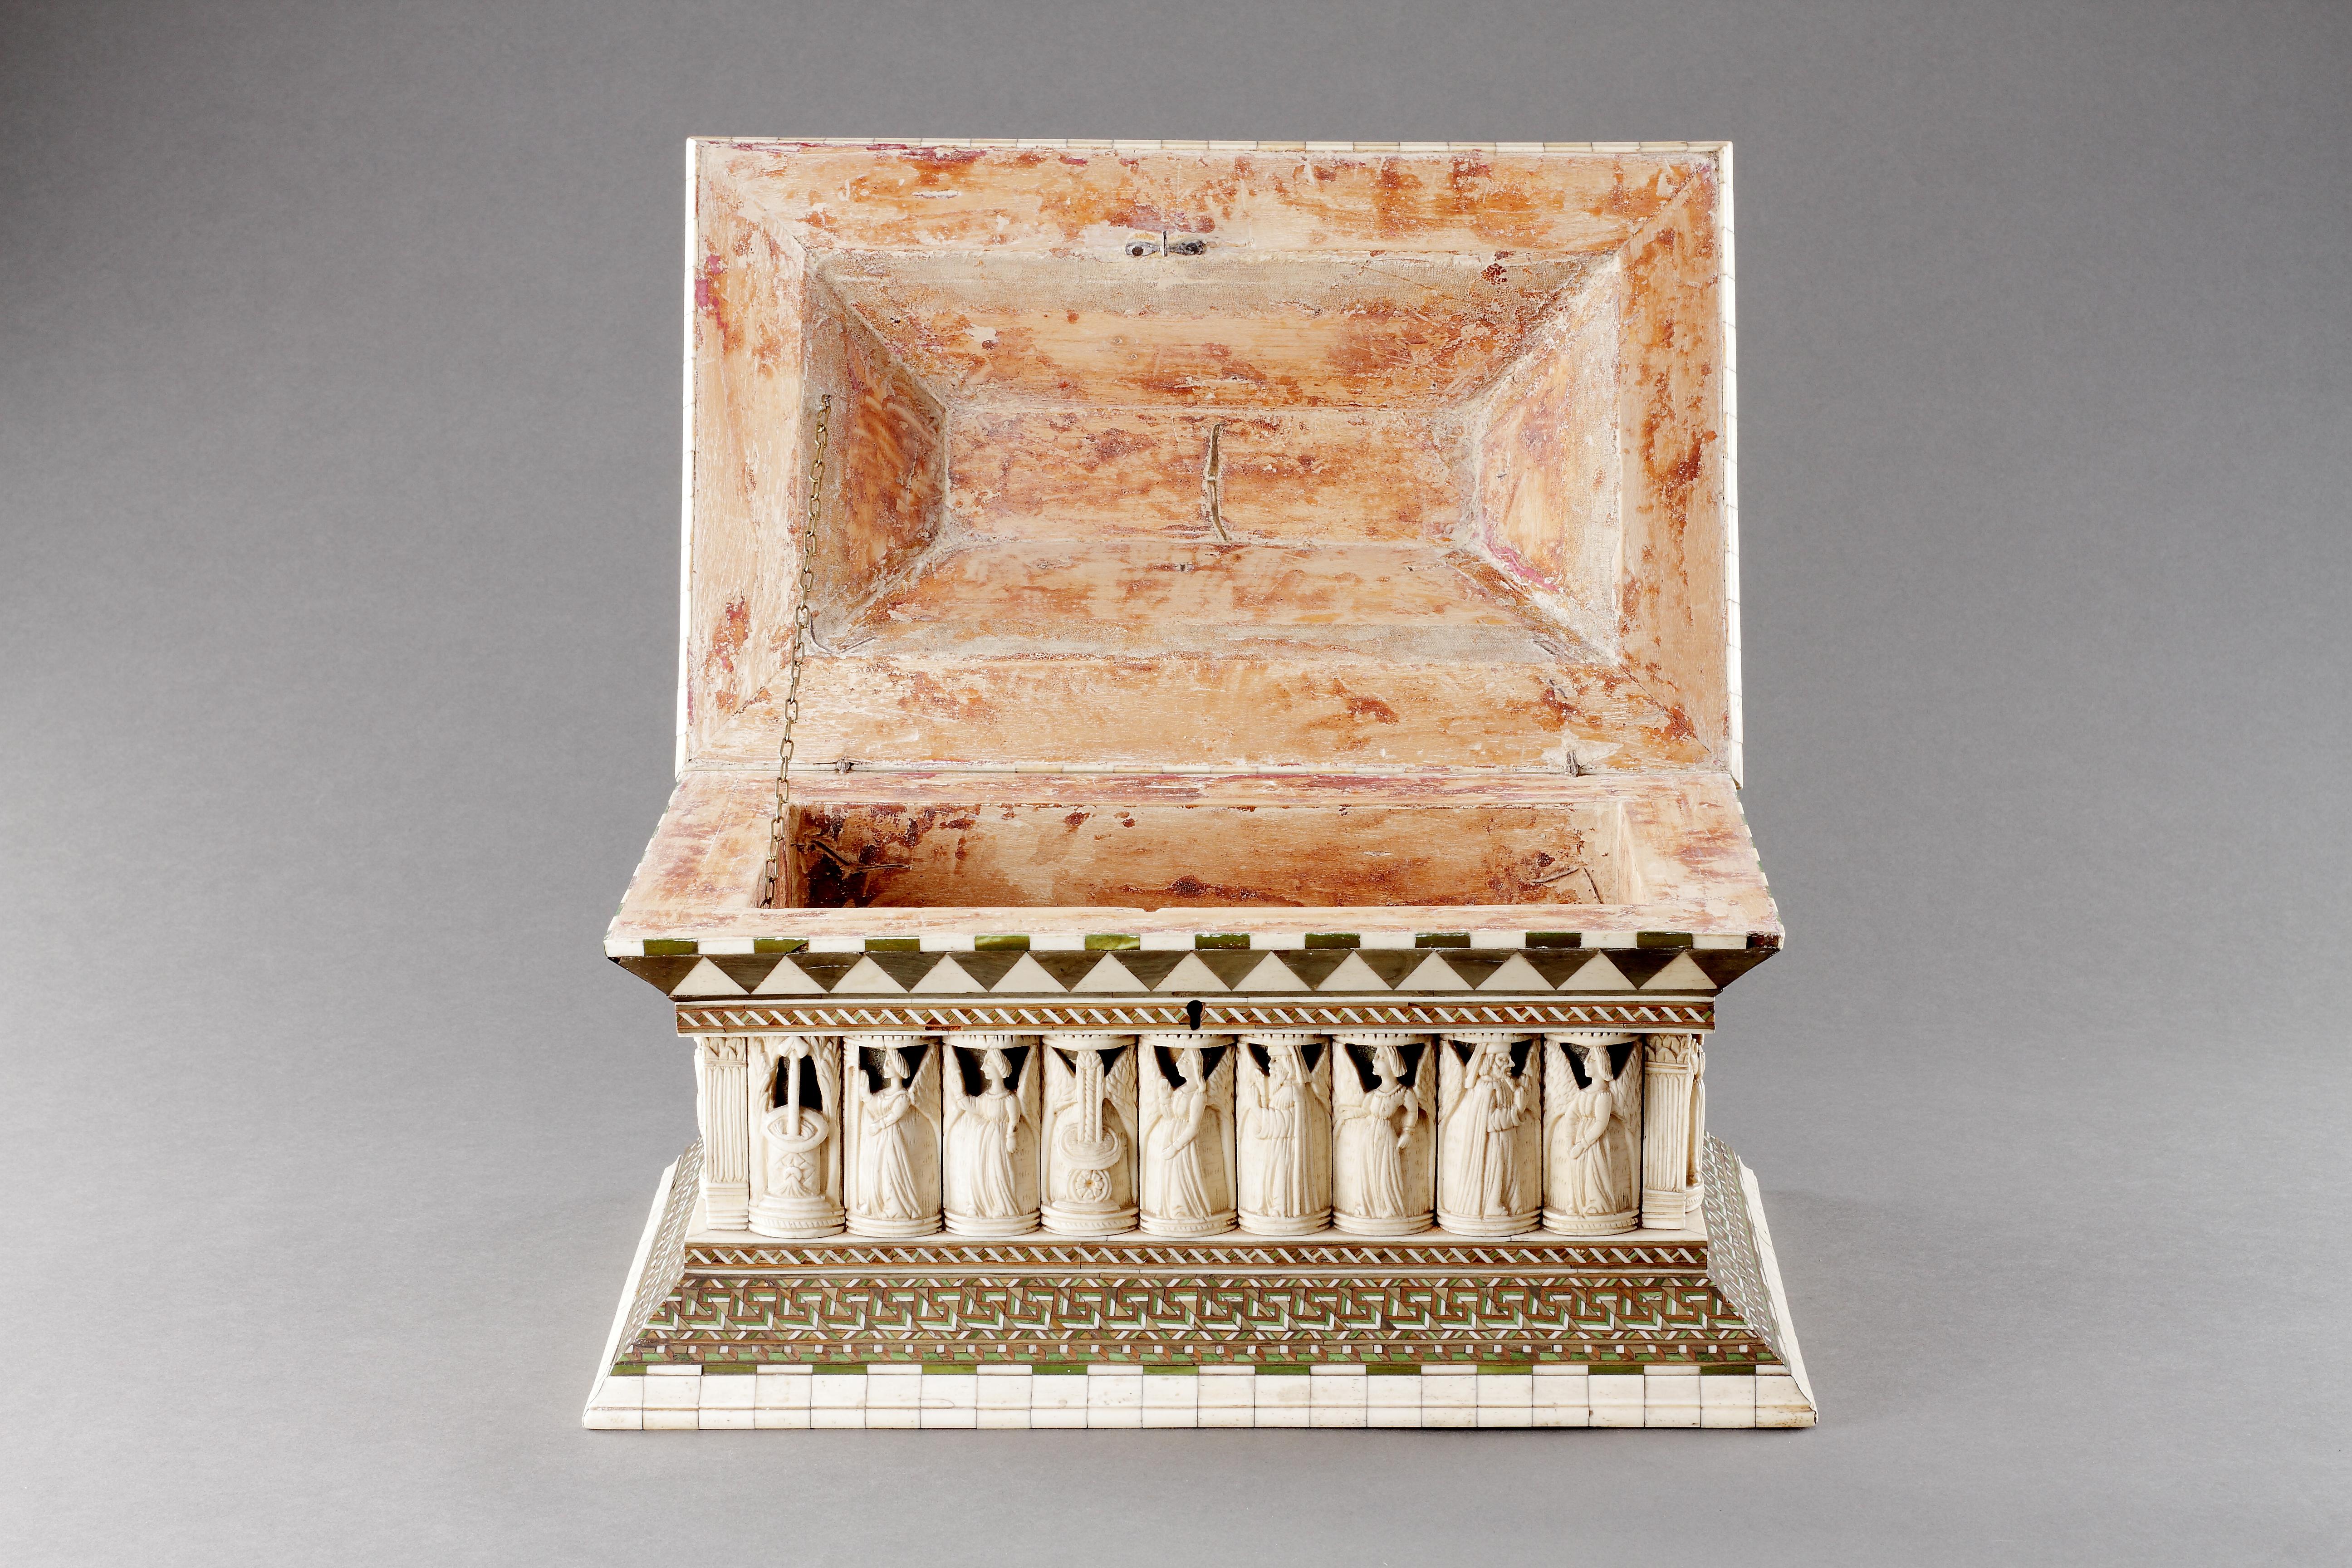 A Rare and Important Sarcophagus ‘Wedding’ Casket 
Attributed to the Embriachi workshop / and the so-called: 
Master of the ‘Susanna Two’ 
Bone, Wood, Polychrome, Metal  	
Venice, Italy
15th Century / Circa 1450 - 75 

SIZE: 25cm high, 41cm wide,